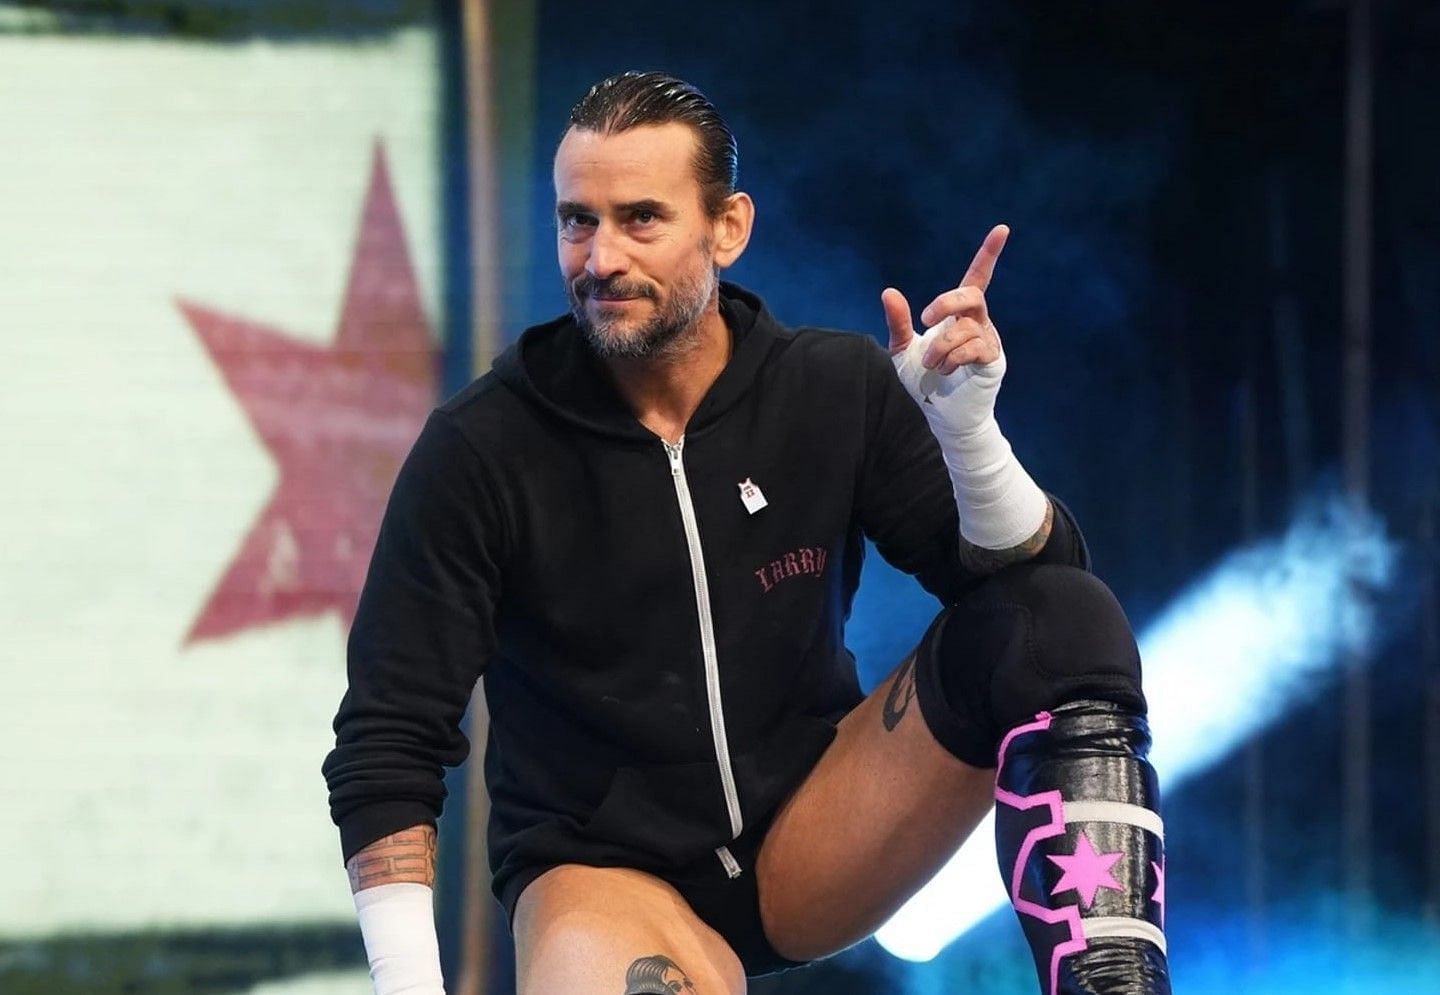 Would Punk and Triple H be willing to work side by side once again?